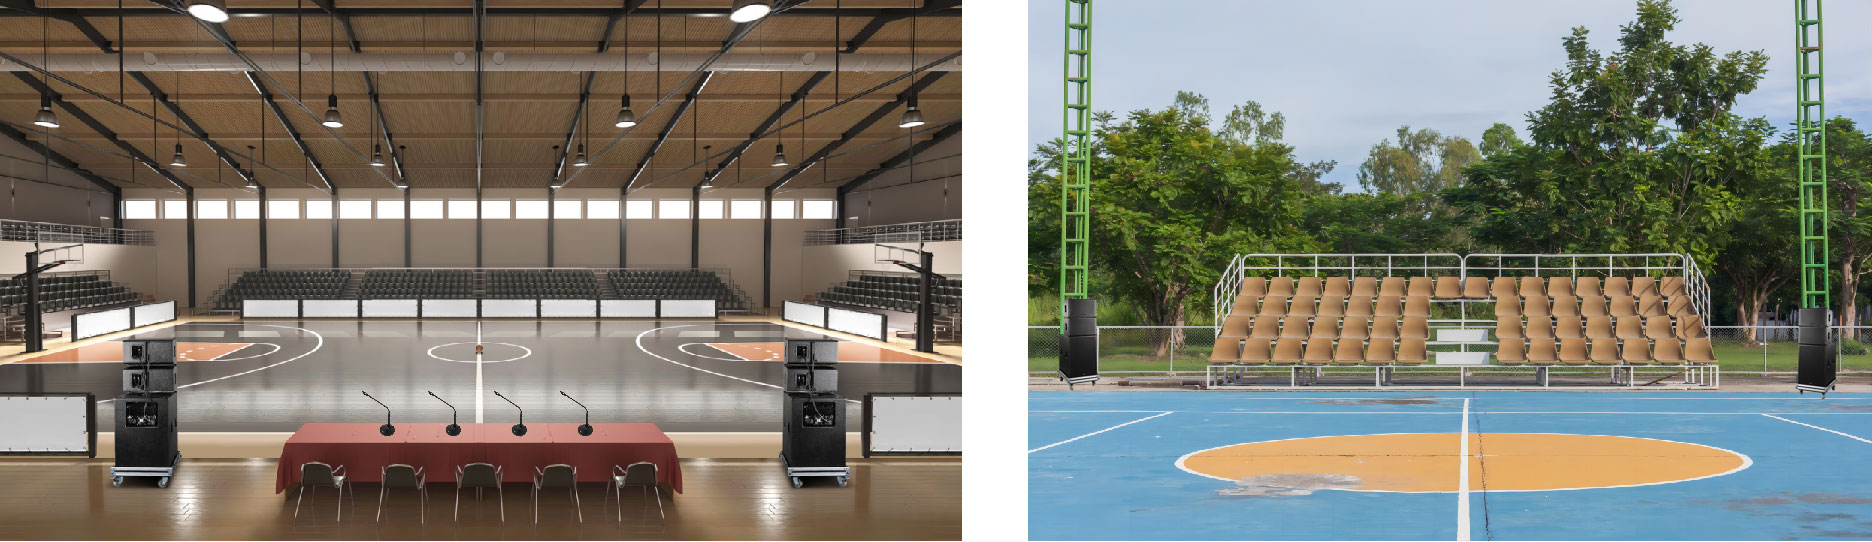 professional-sound-system-solution-for-basketball-court-7.jpg